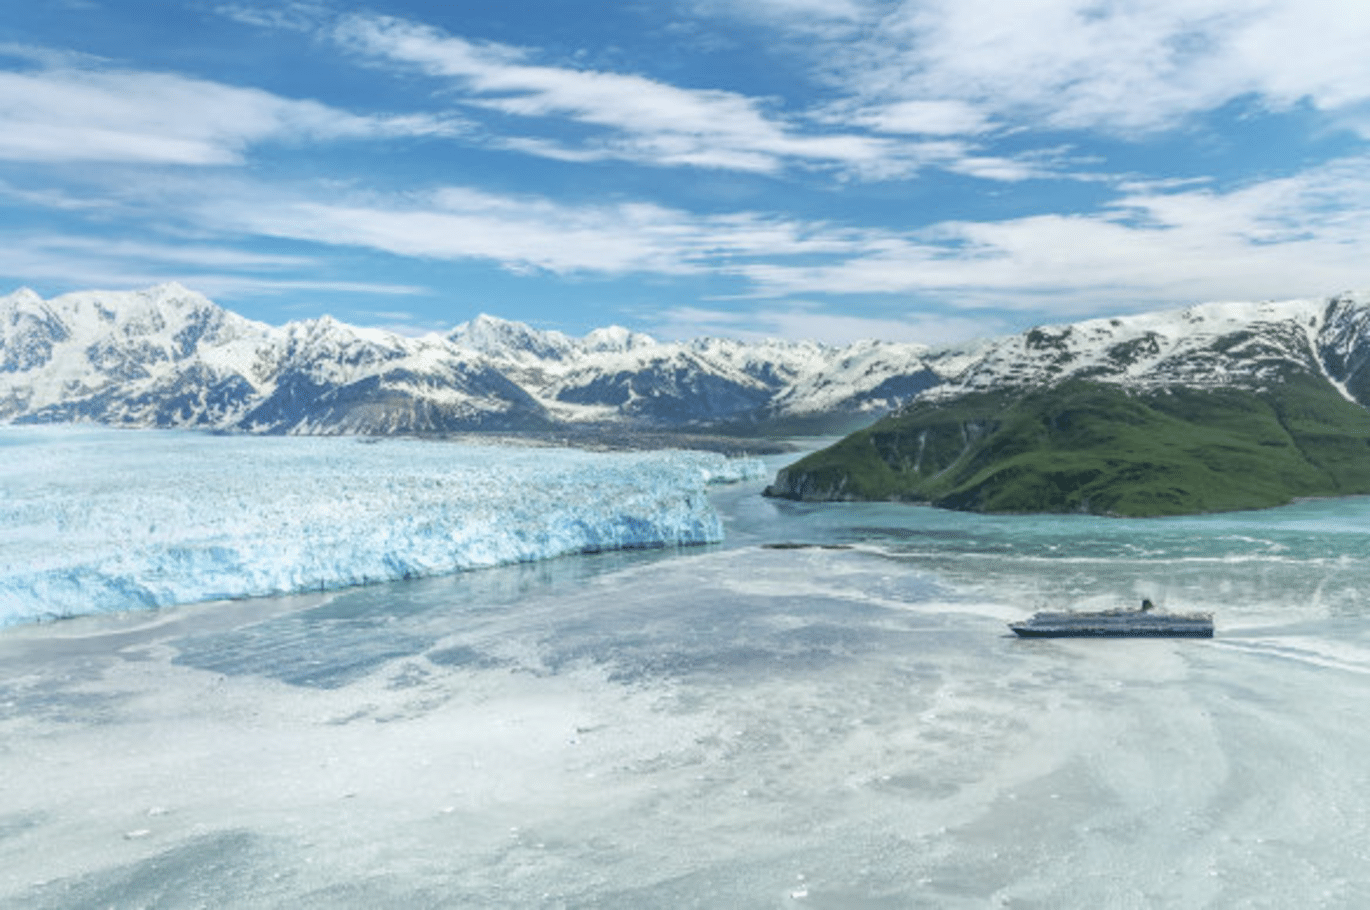 The Majestic Alaskan Glacier That Puts Game of Thrones to Shame